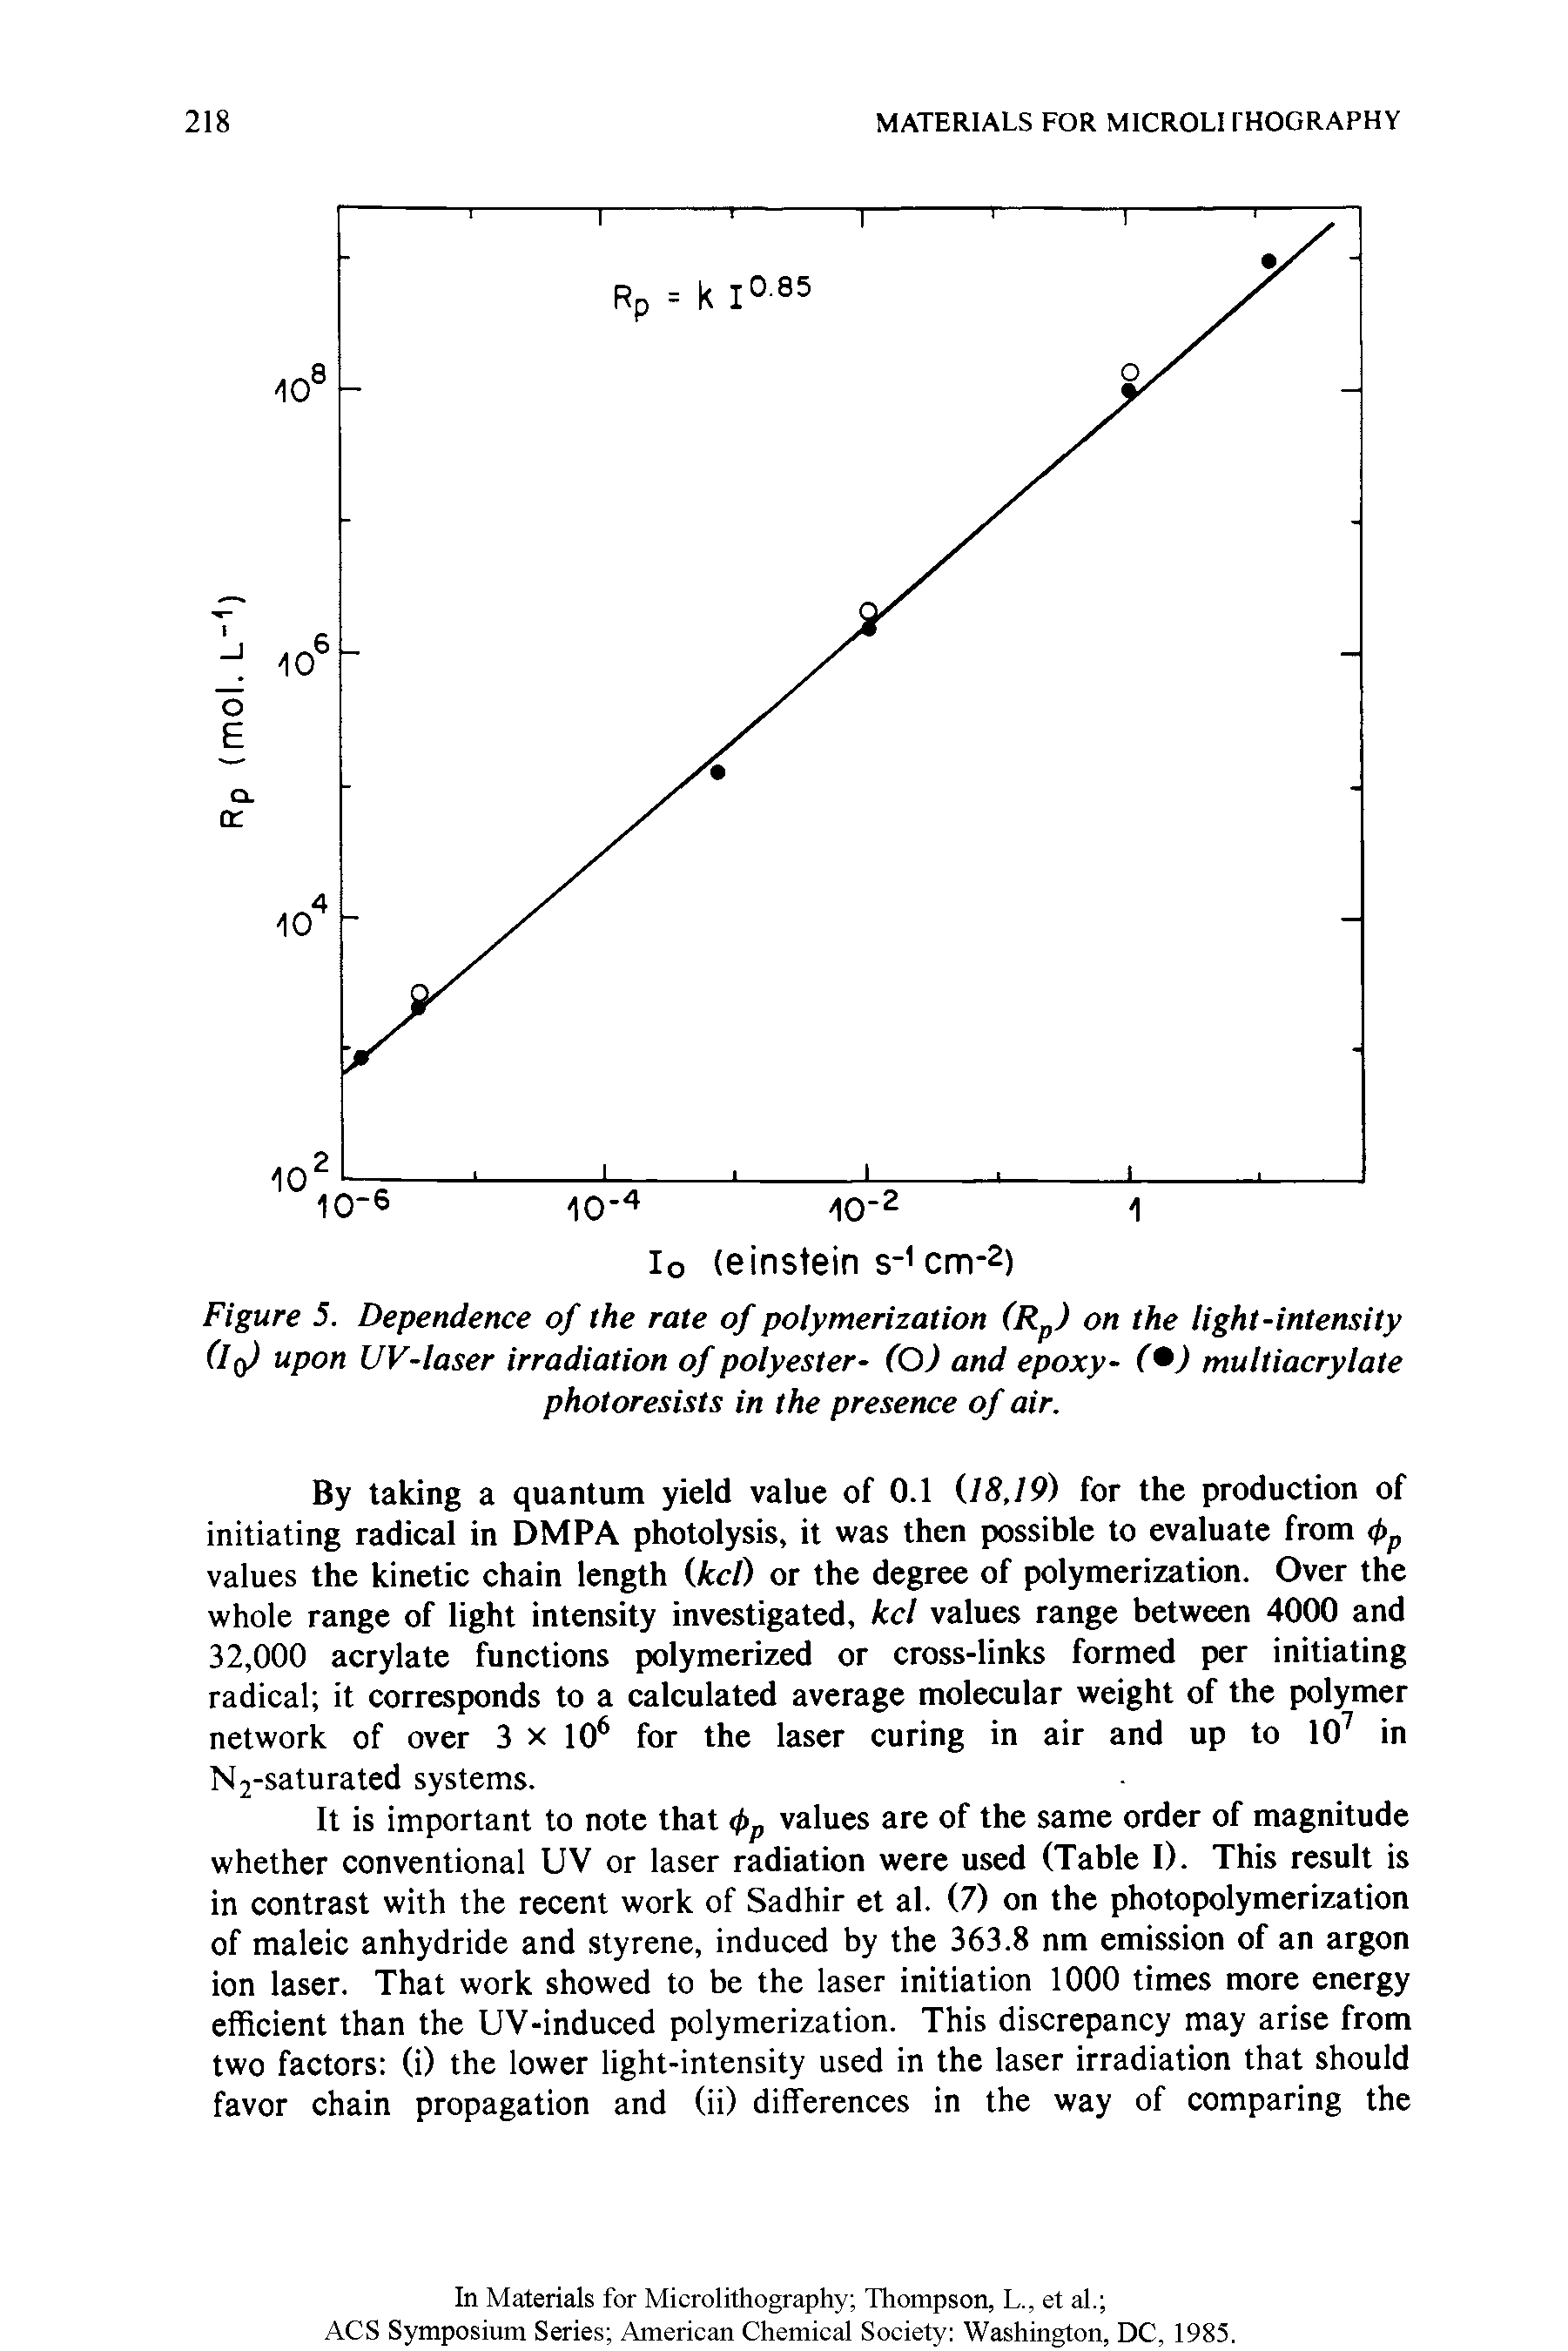 Figure 5. Dependence of the rate of polymerization (Rp) on the light-intensity (Iq) upon UV-laser irradiation of polyester- (O) and epoxy- ( ) multiacrylate photoresists in the presence of air.